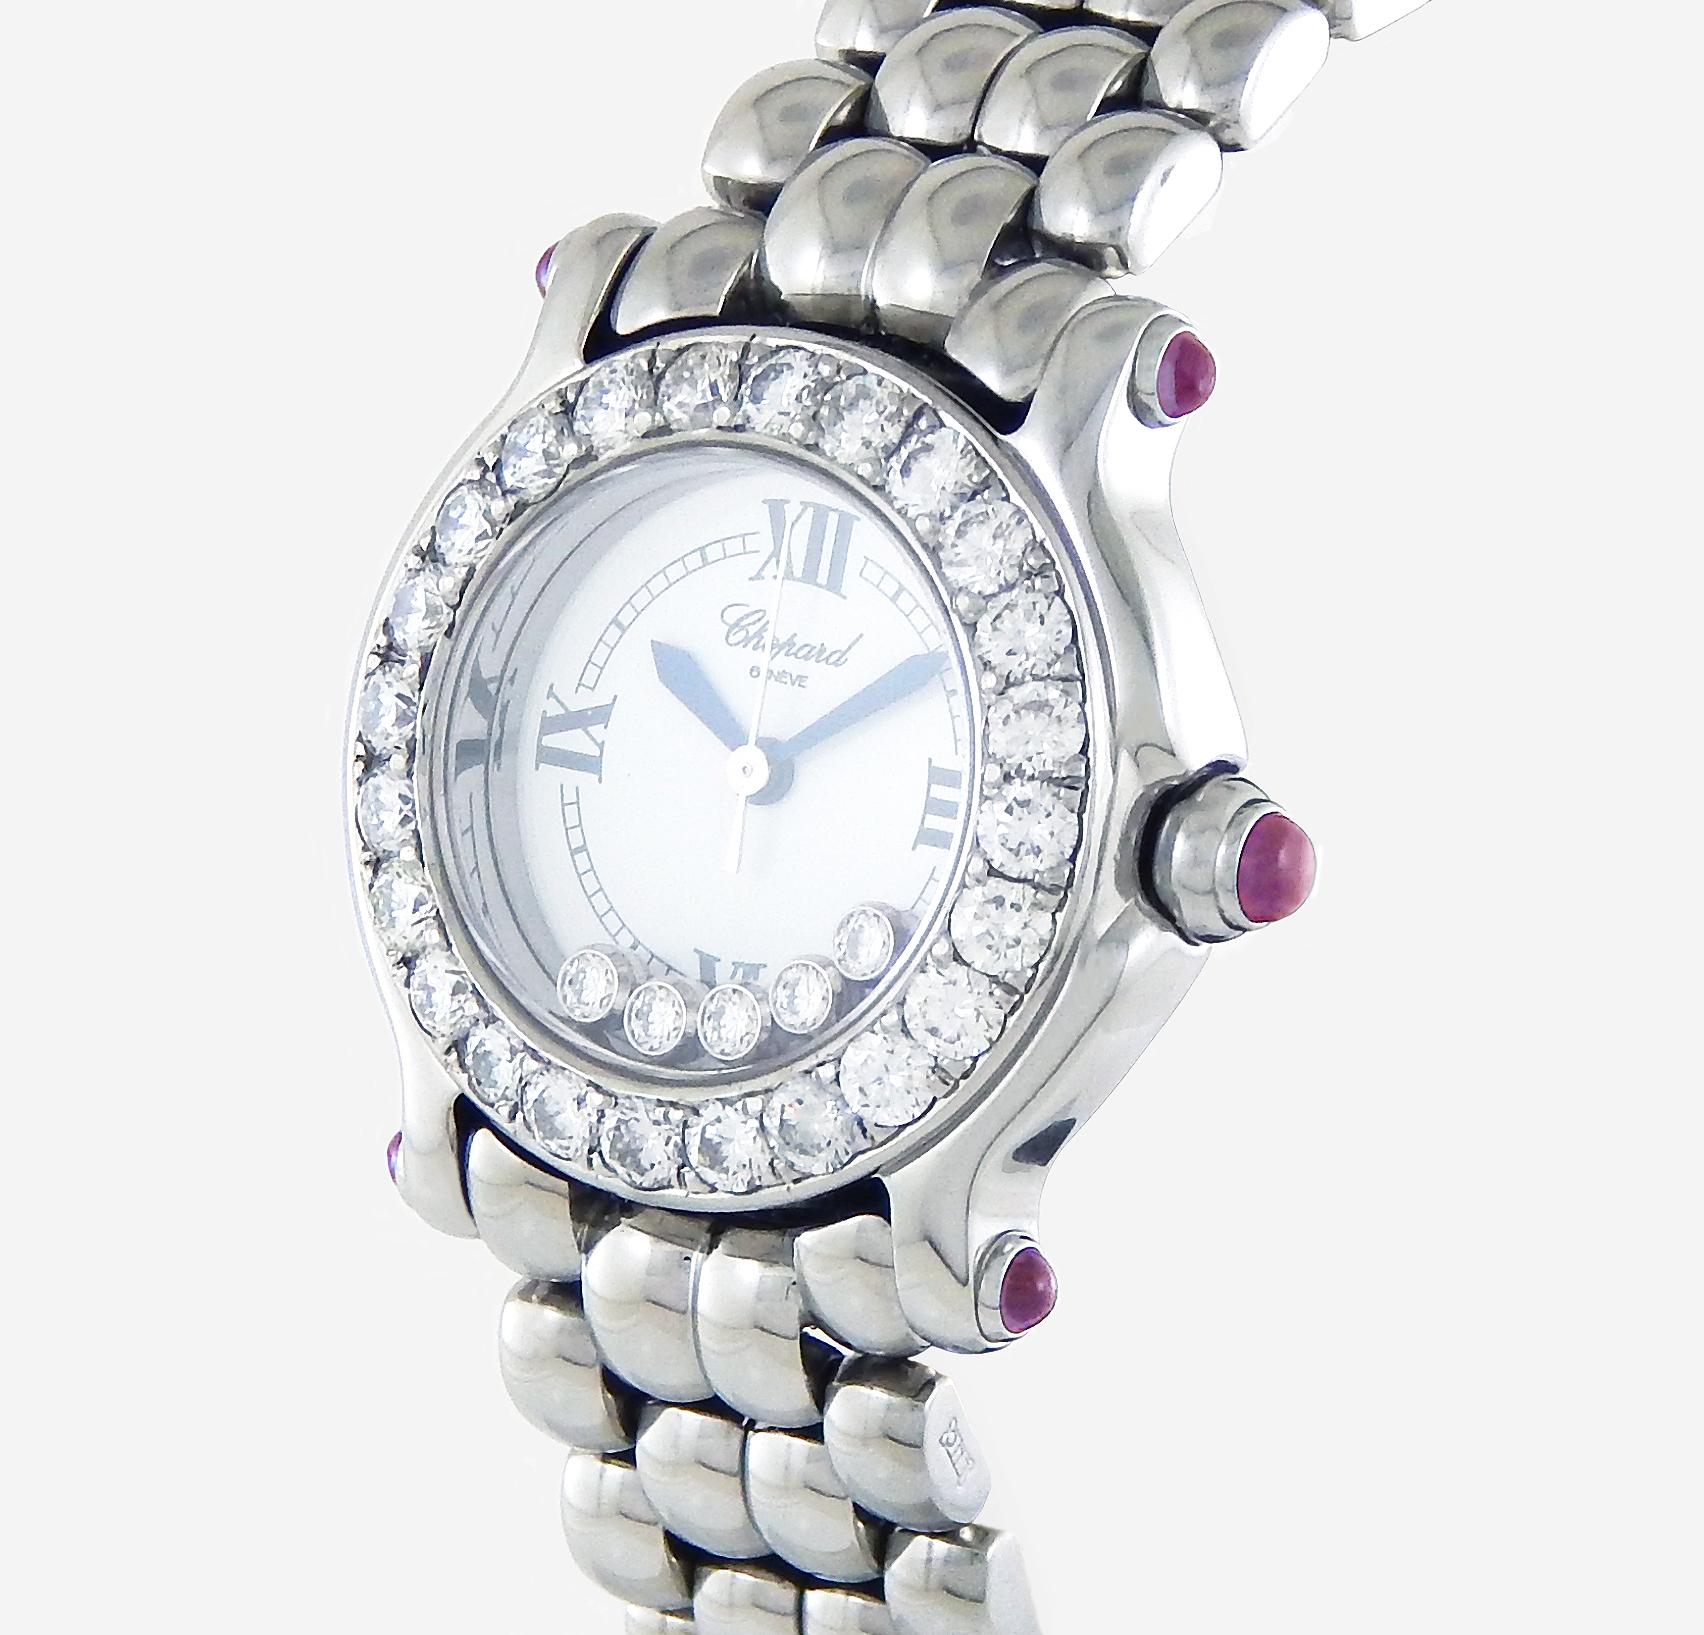 *MINT CONDITION.
Box and manual included.
This watch is a superlative masterpiece by Chopard for an elegant wrist.
Original diamond dial with a custom made diamond bezel.

Case: 26mm
Band Width: 14mm
Diamond Clarity: VS-1
Diamond Color: E-F
Diamond